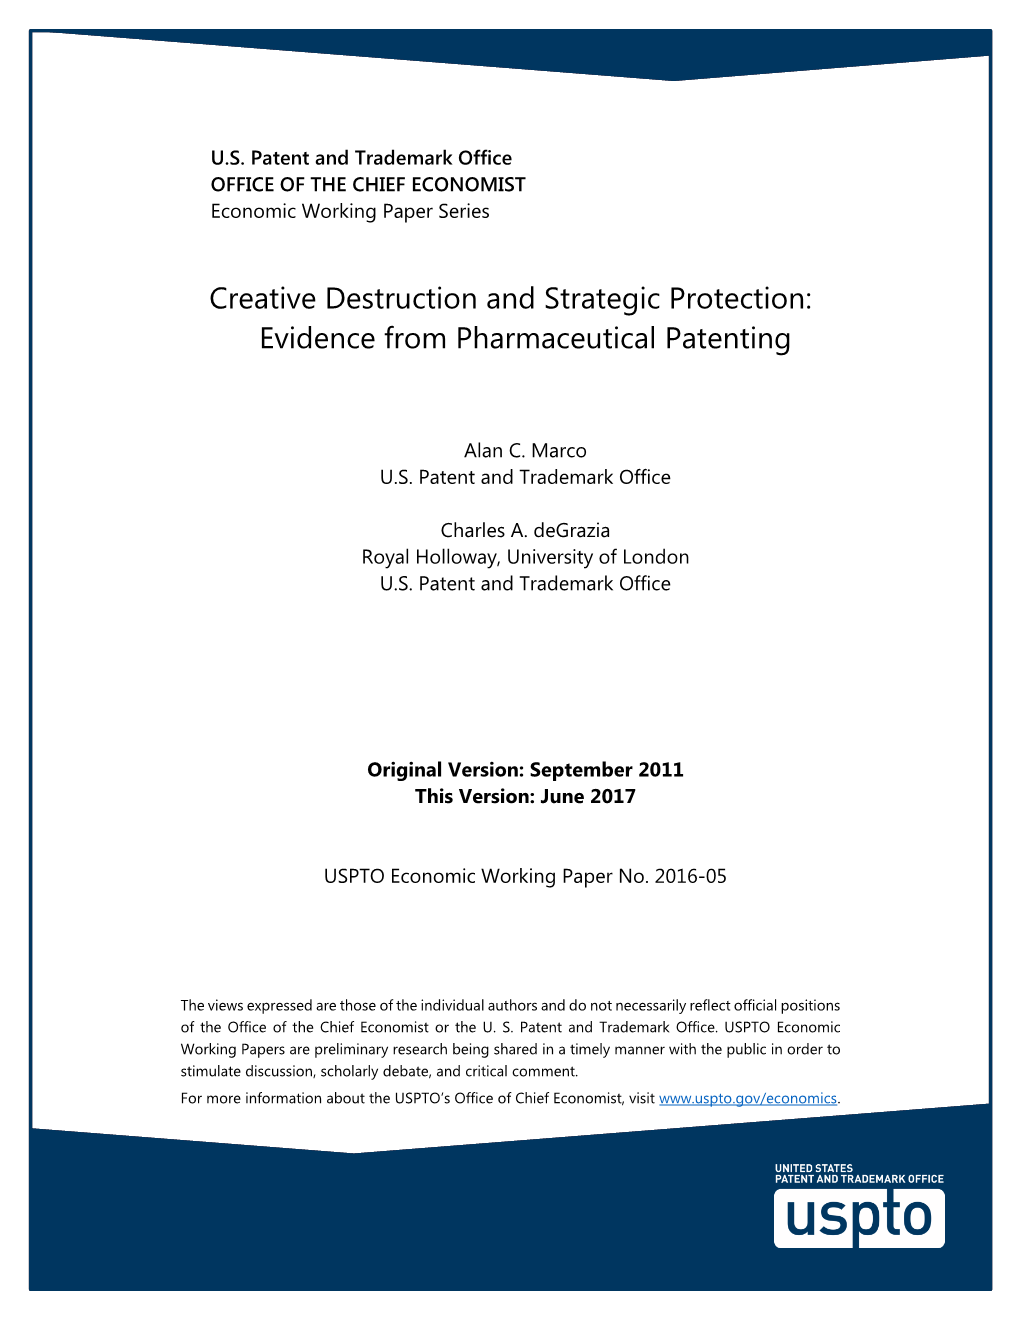 Creative Destruction and Strategic Protection: Evidence from Pharmaceutical Patenting